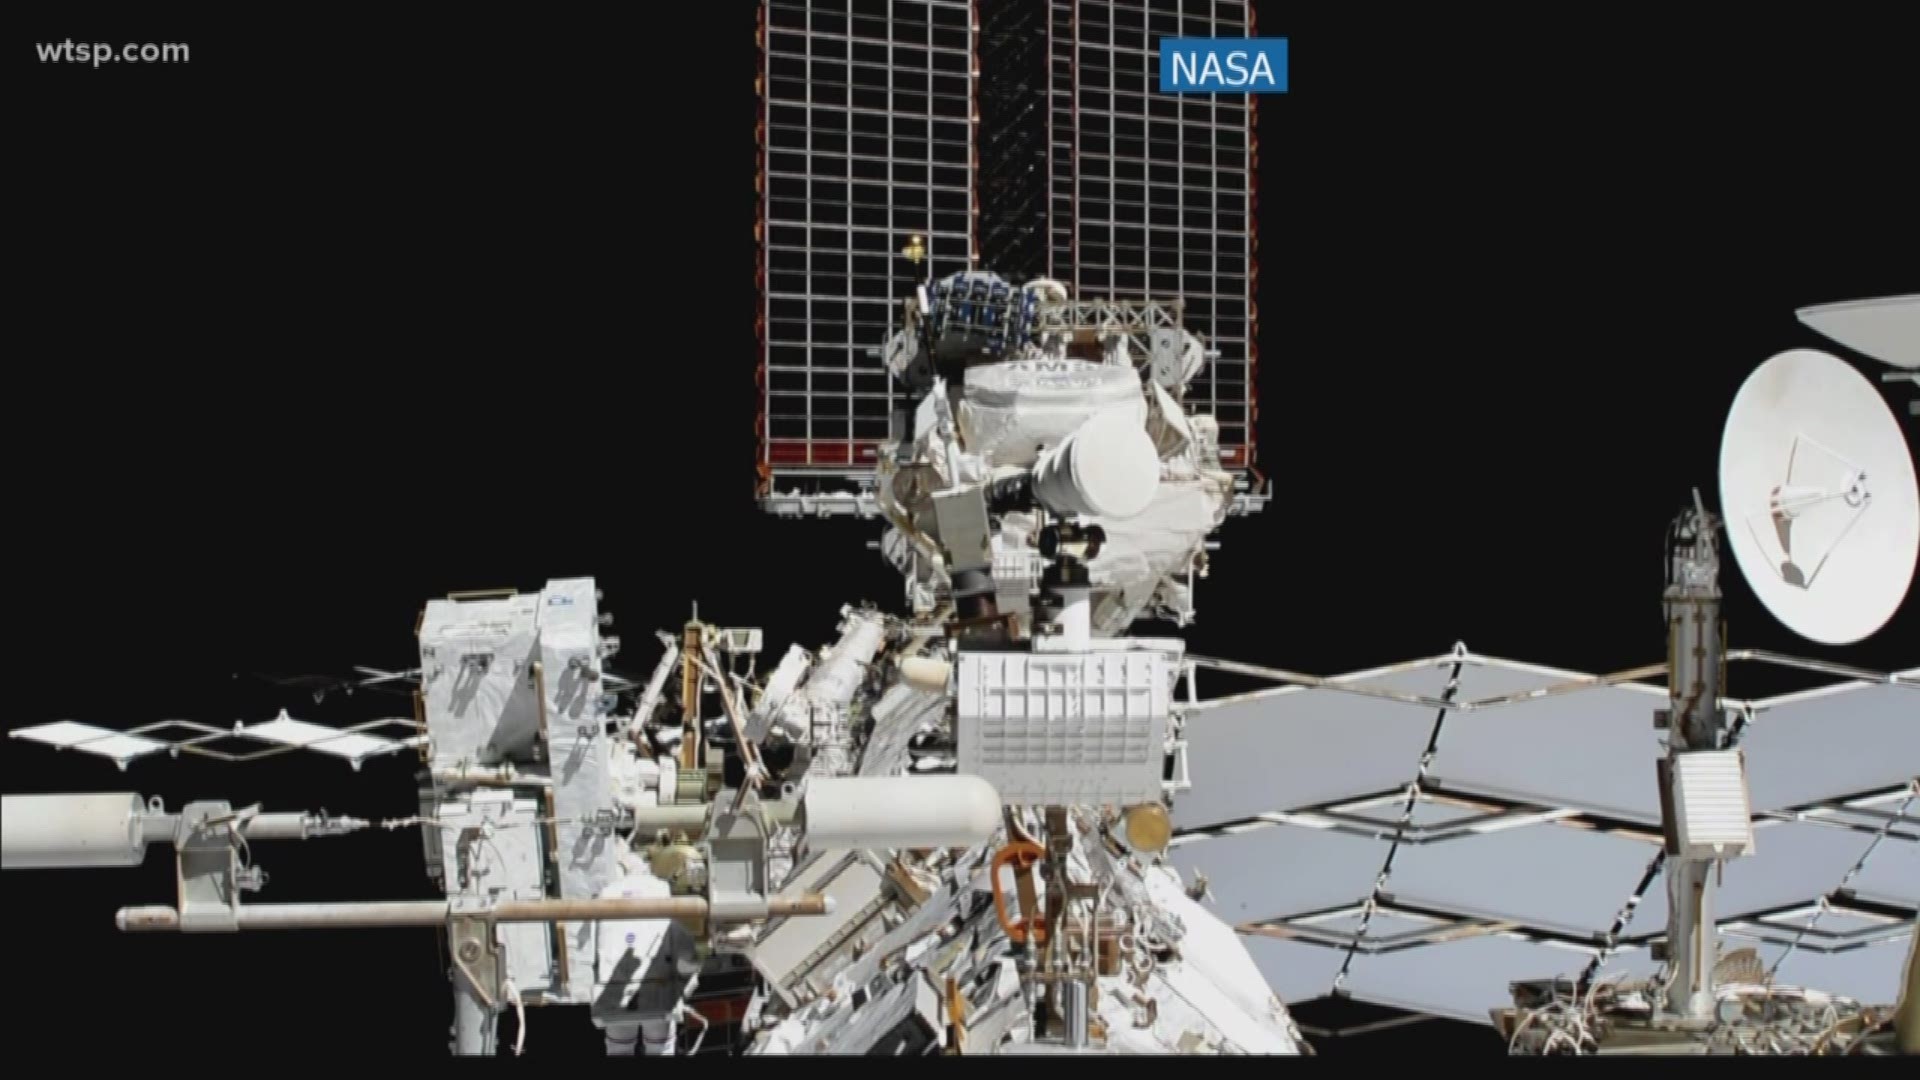 The $2 billion dollar piece of equipment was not designed to be repaired in space.